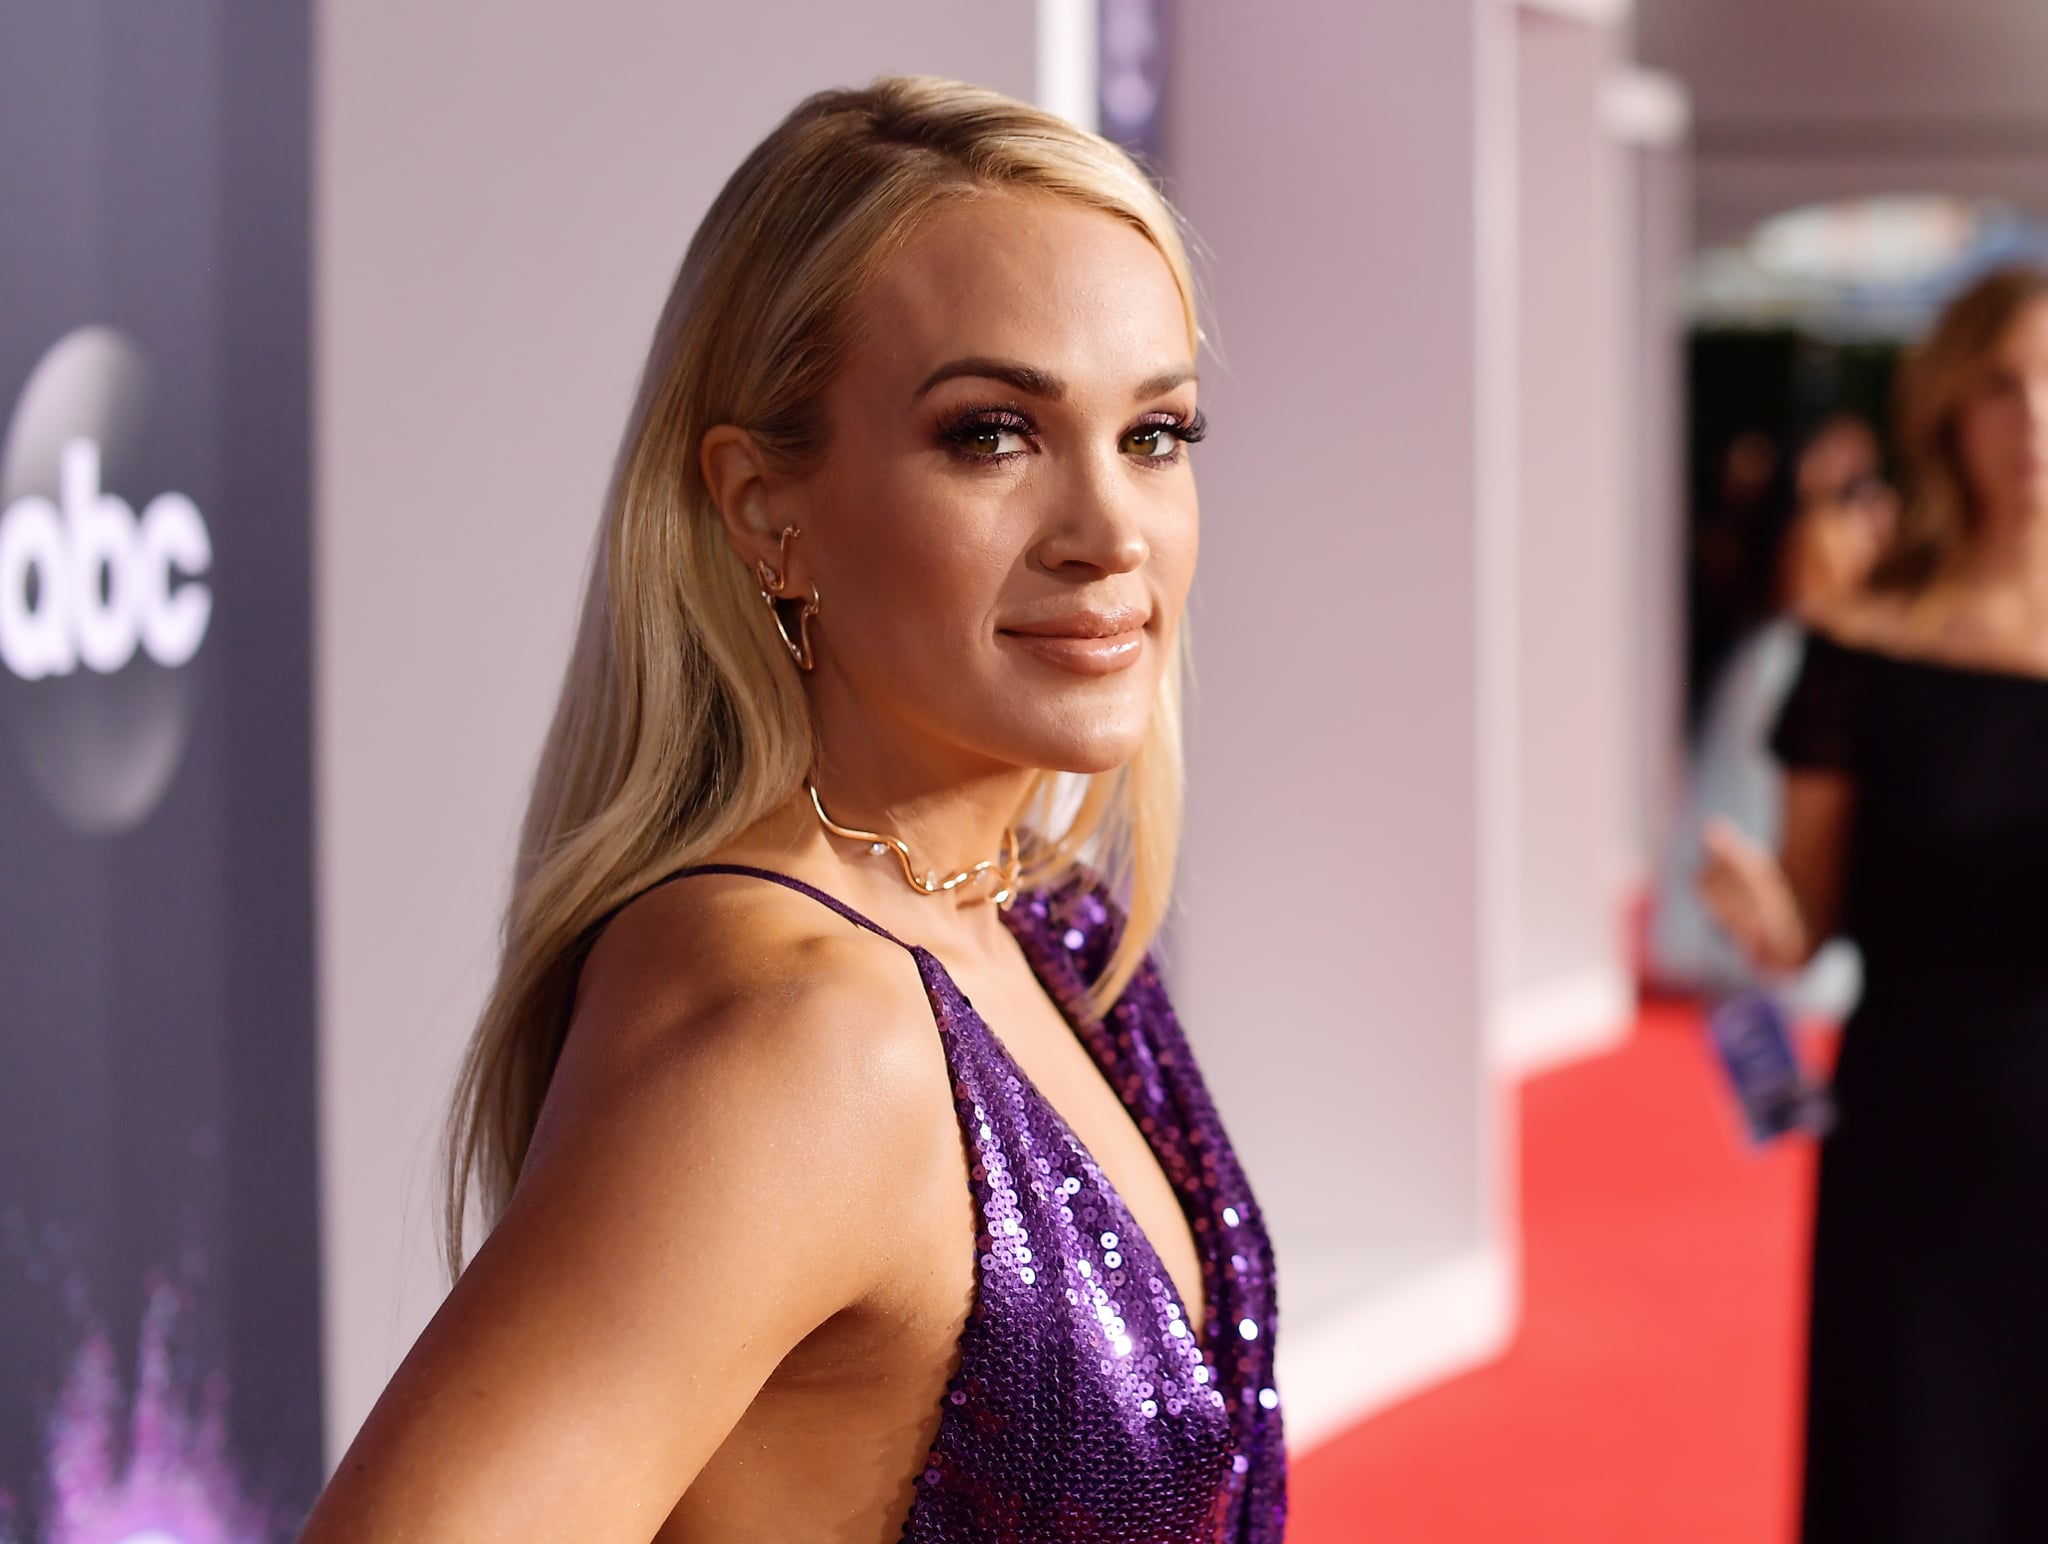 LOS ANGELES, CALIFORNIA - NOVEMBER 24: Carrie Underwood attends the 2019 American Music Awards at Microsoft Theater on November 24, 2019 in Los Angeles, California. (Photo by Matt Winkelmeyer/Getty Images for dcp)